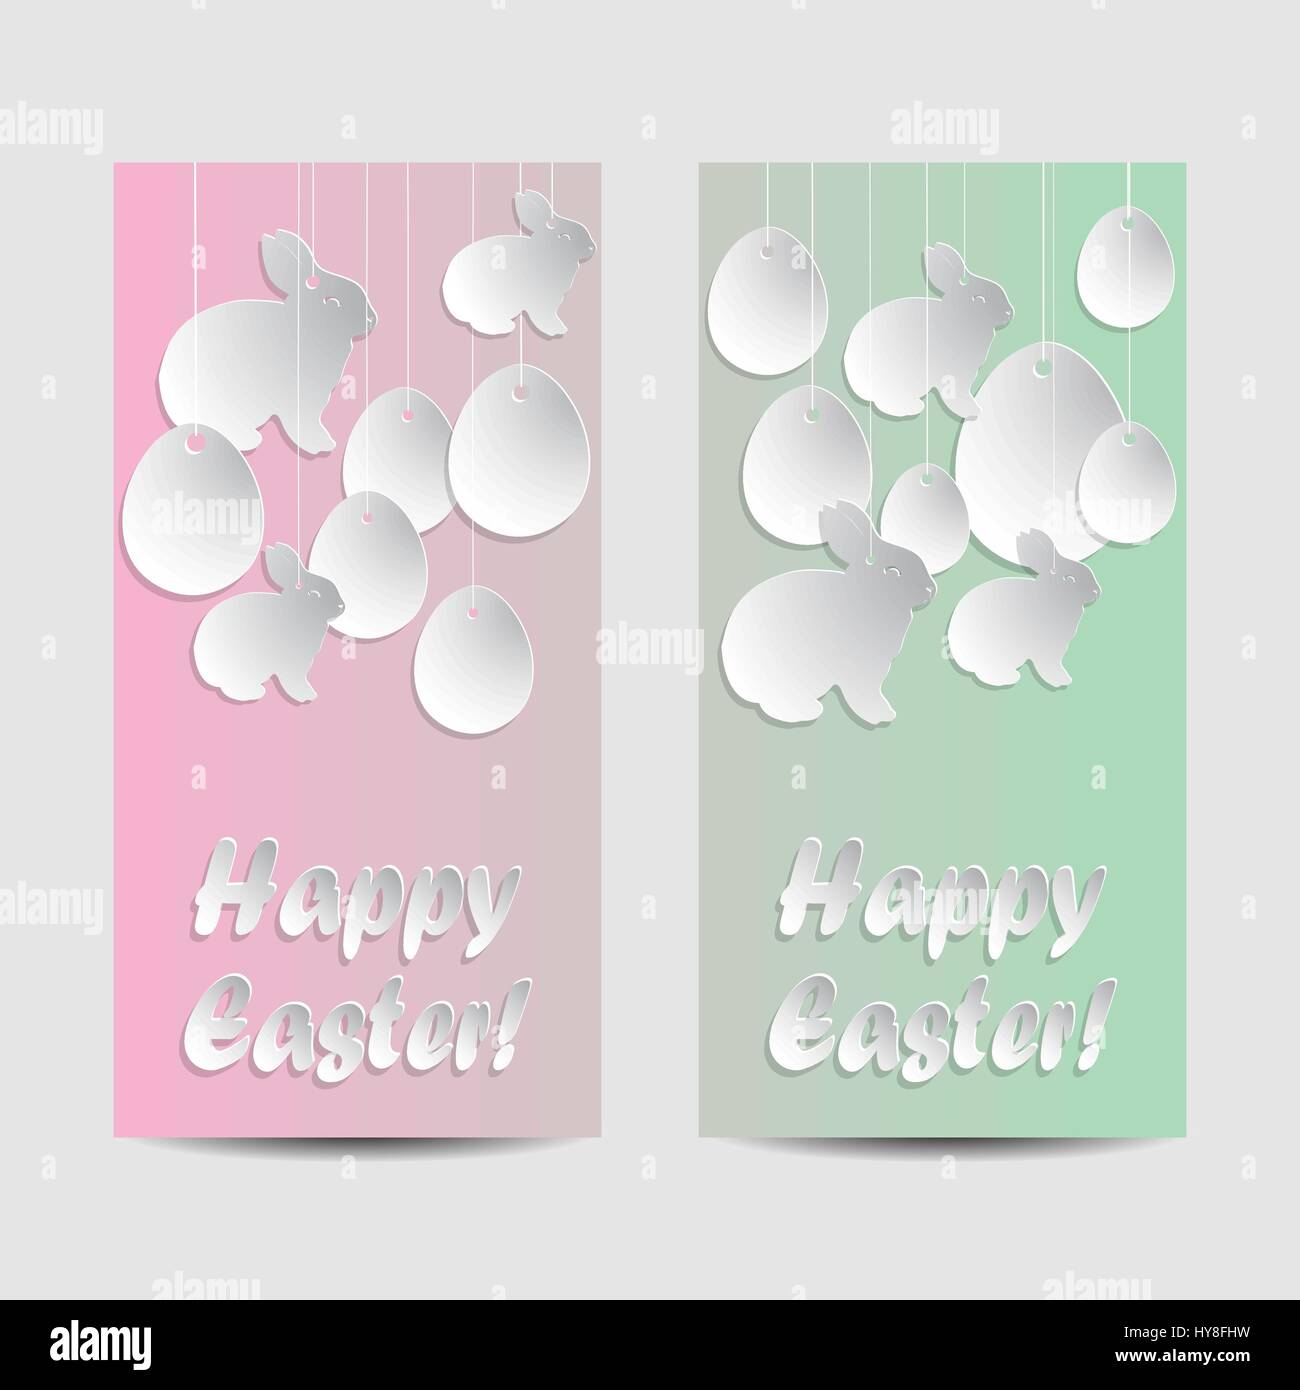 Happy Easter greeting banners. Paper rabbits and eggs with drop shadows hanging on strings. Green and pink pastel background. Vector illustration. Stock Vector